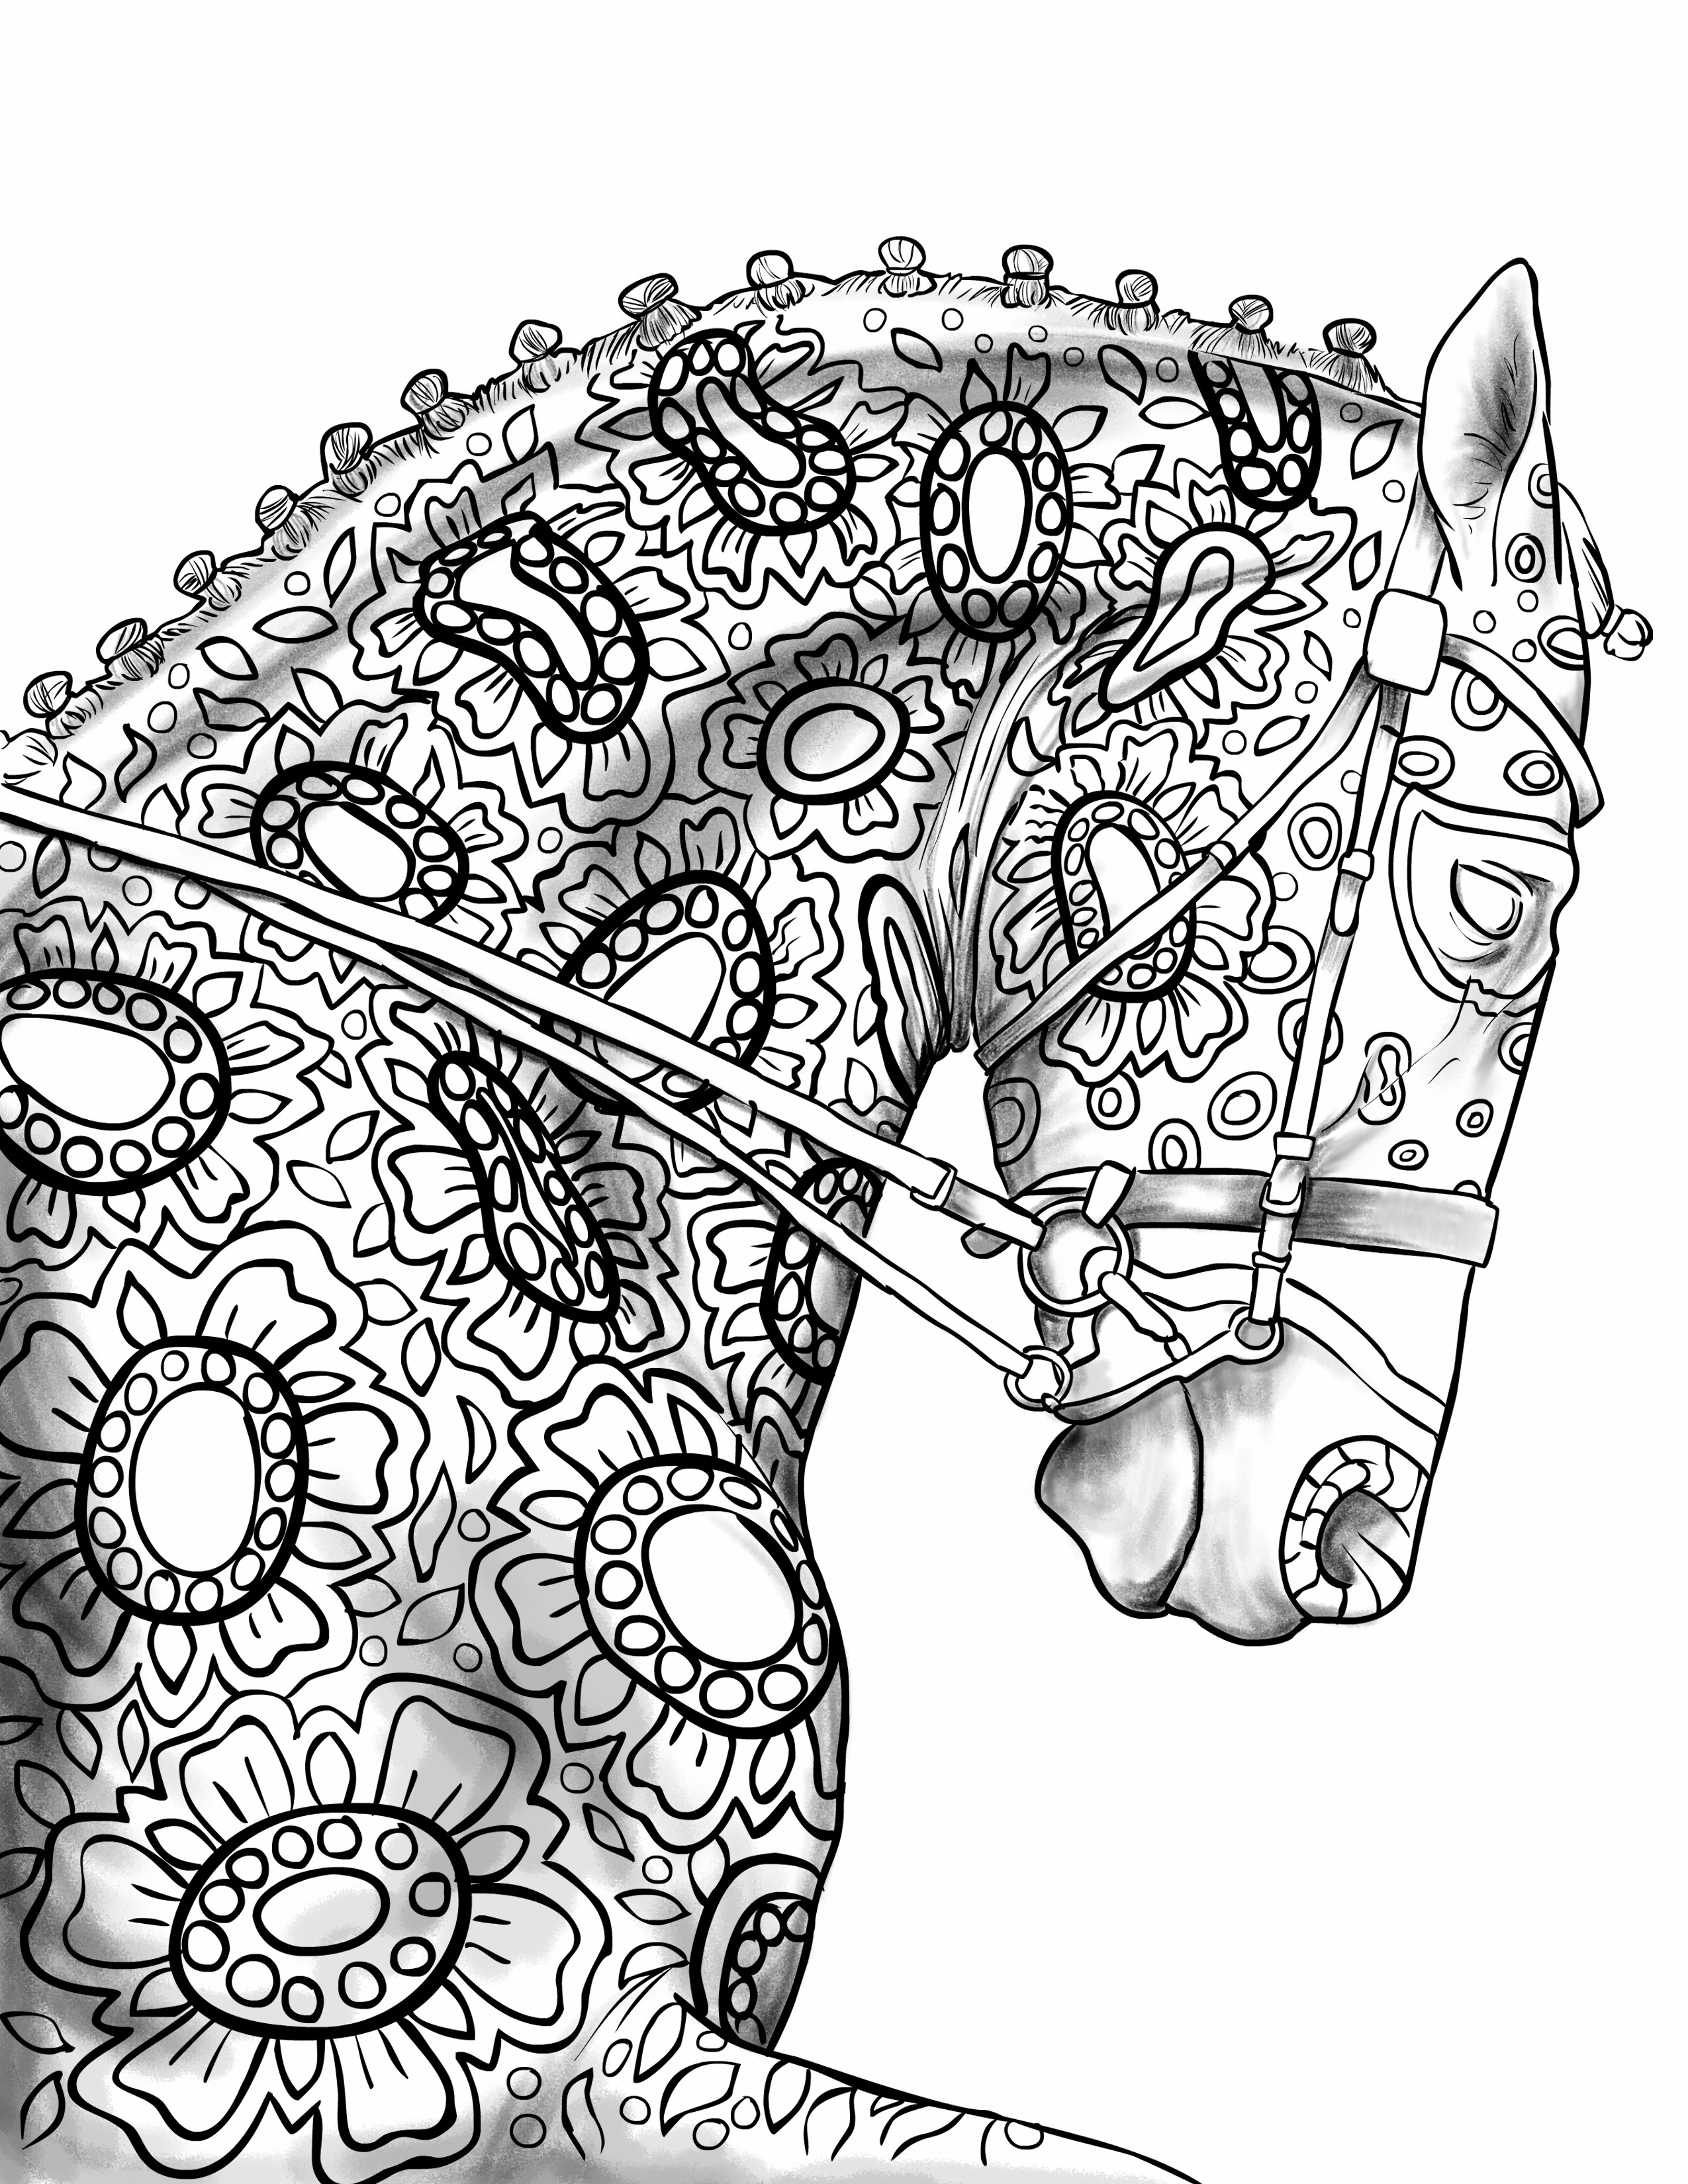 Adult Coloring Book Horse
 World Elephant Day Elephants Coloring Pages for Adults